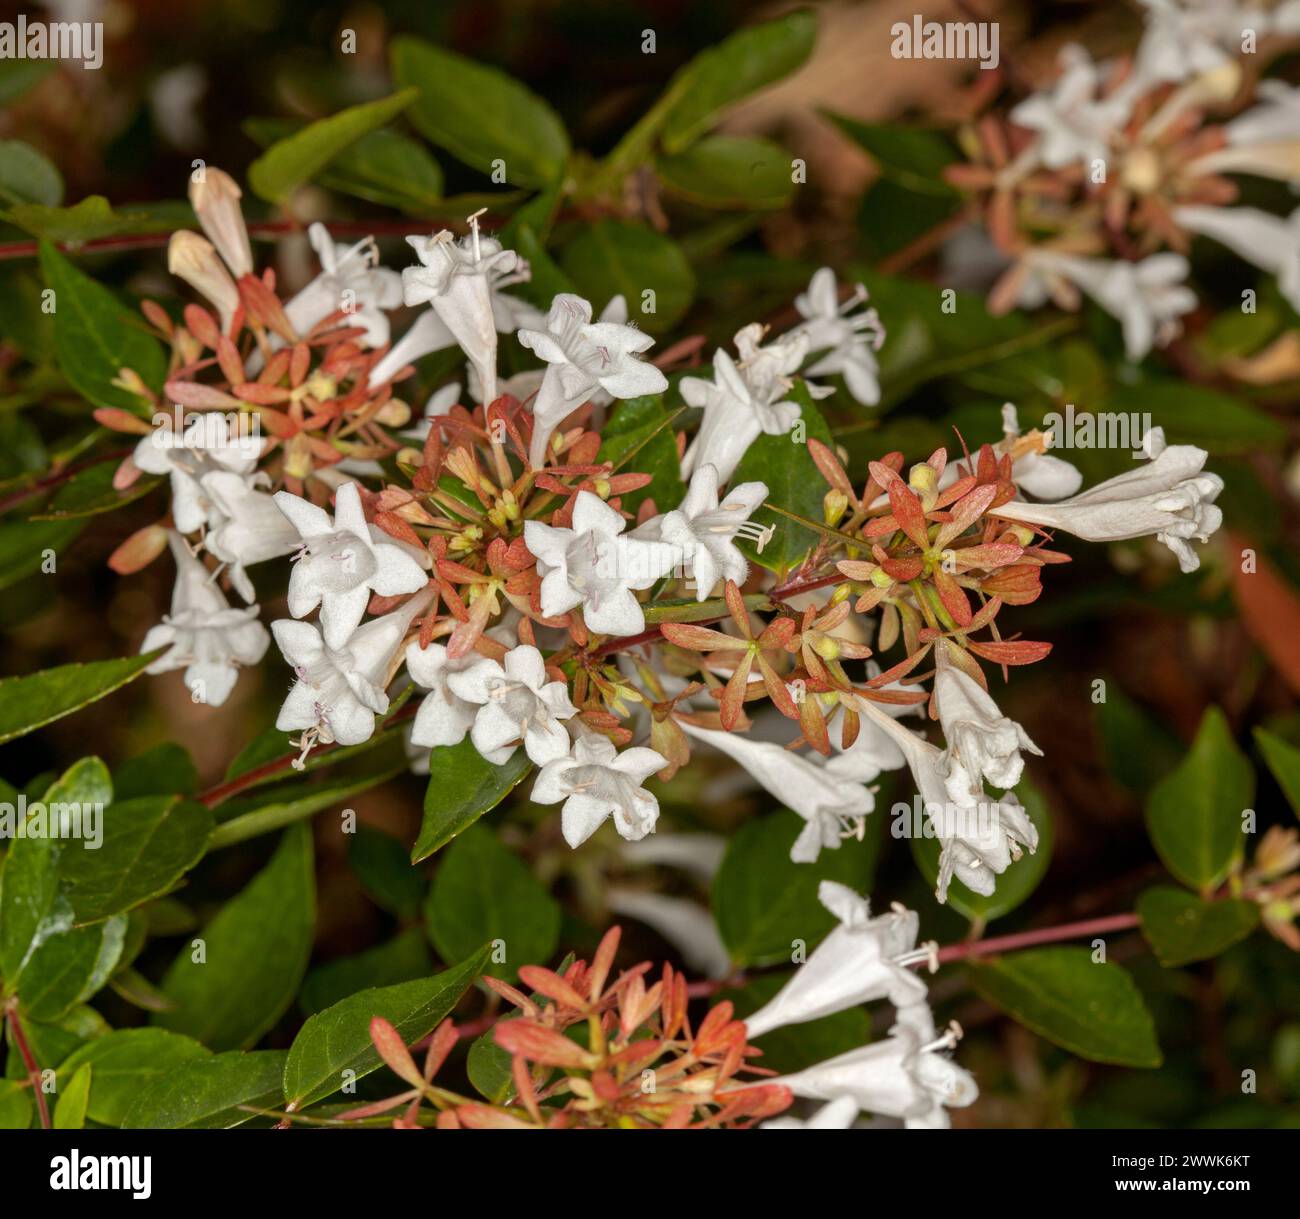 Mass of white bell-shaped perfumed flowers and dark green leaves of deciduous shrub, Abelia grandiflora in an Australian garden Stock Photo